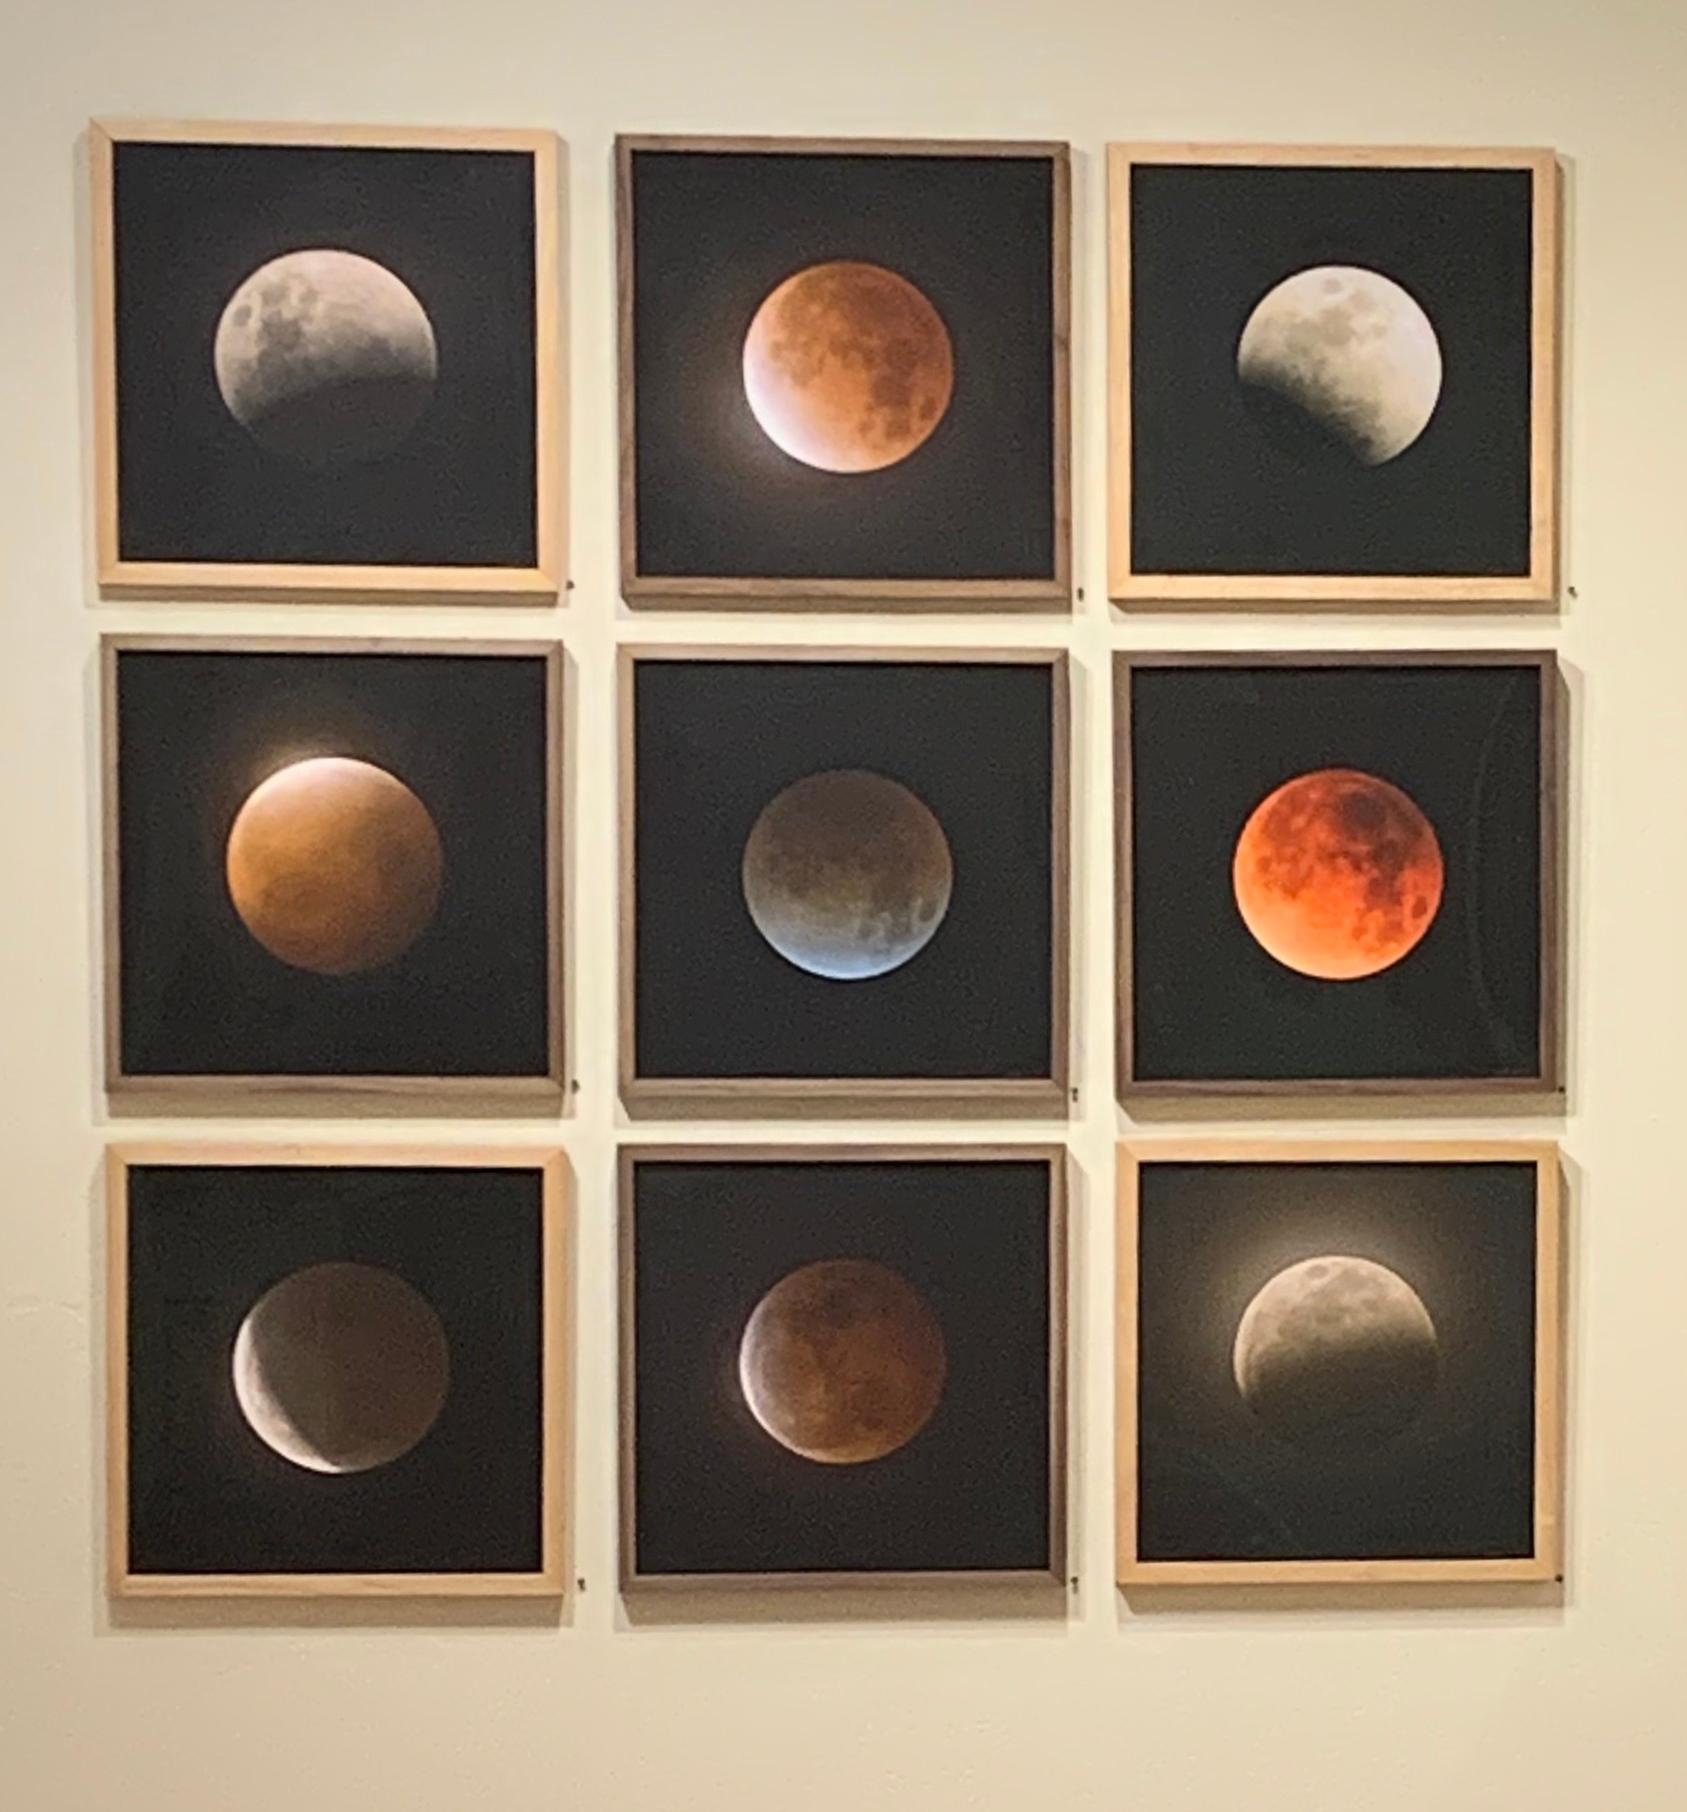 Nine Lunar Eclipses (A) - Contemporary Mixed Media Art by Kate Breakey